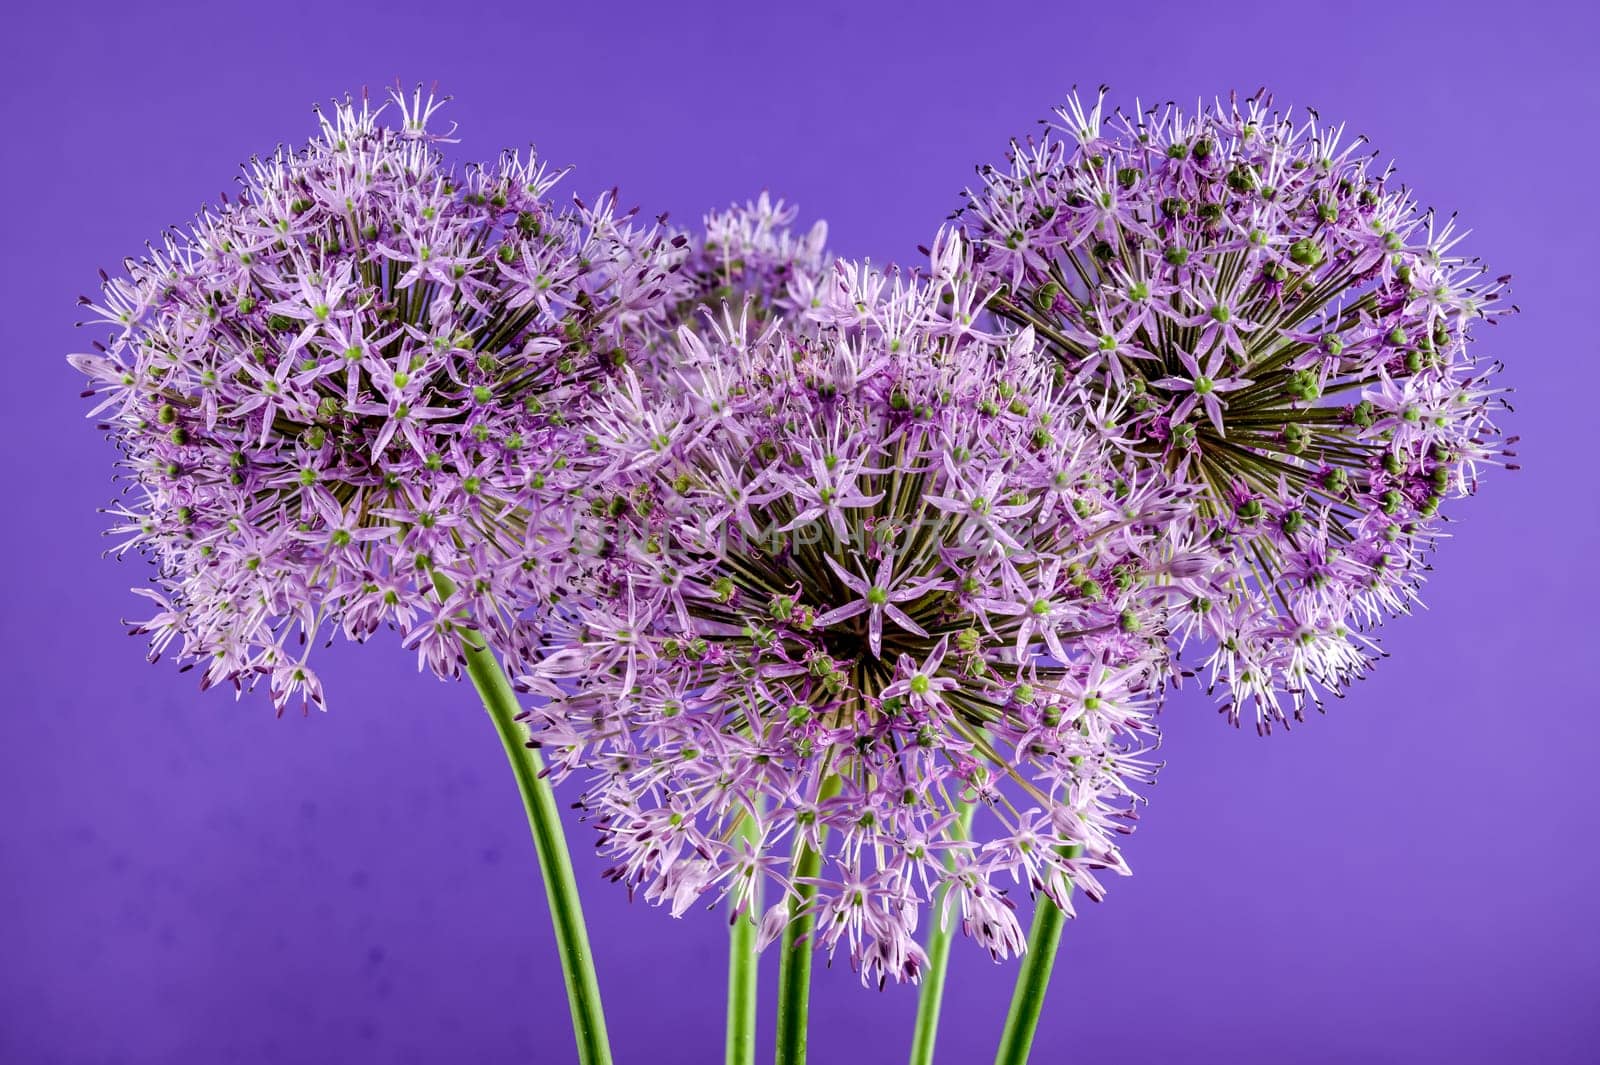 Blooming pink allium aflatunense on a purple background by Multipedia